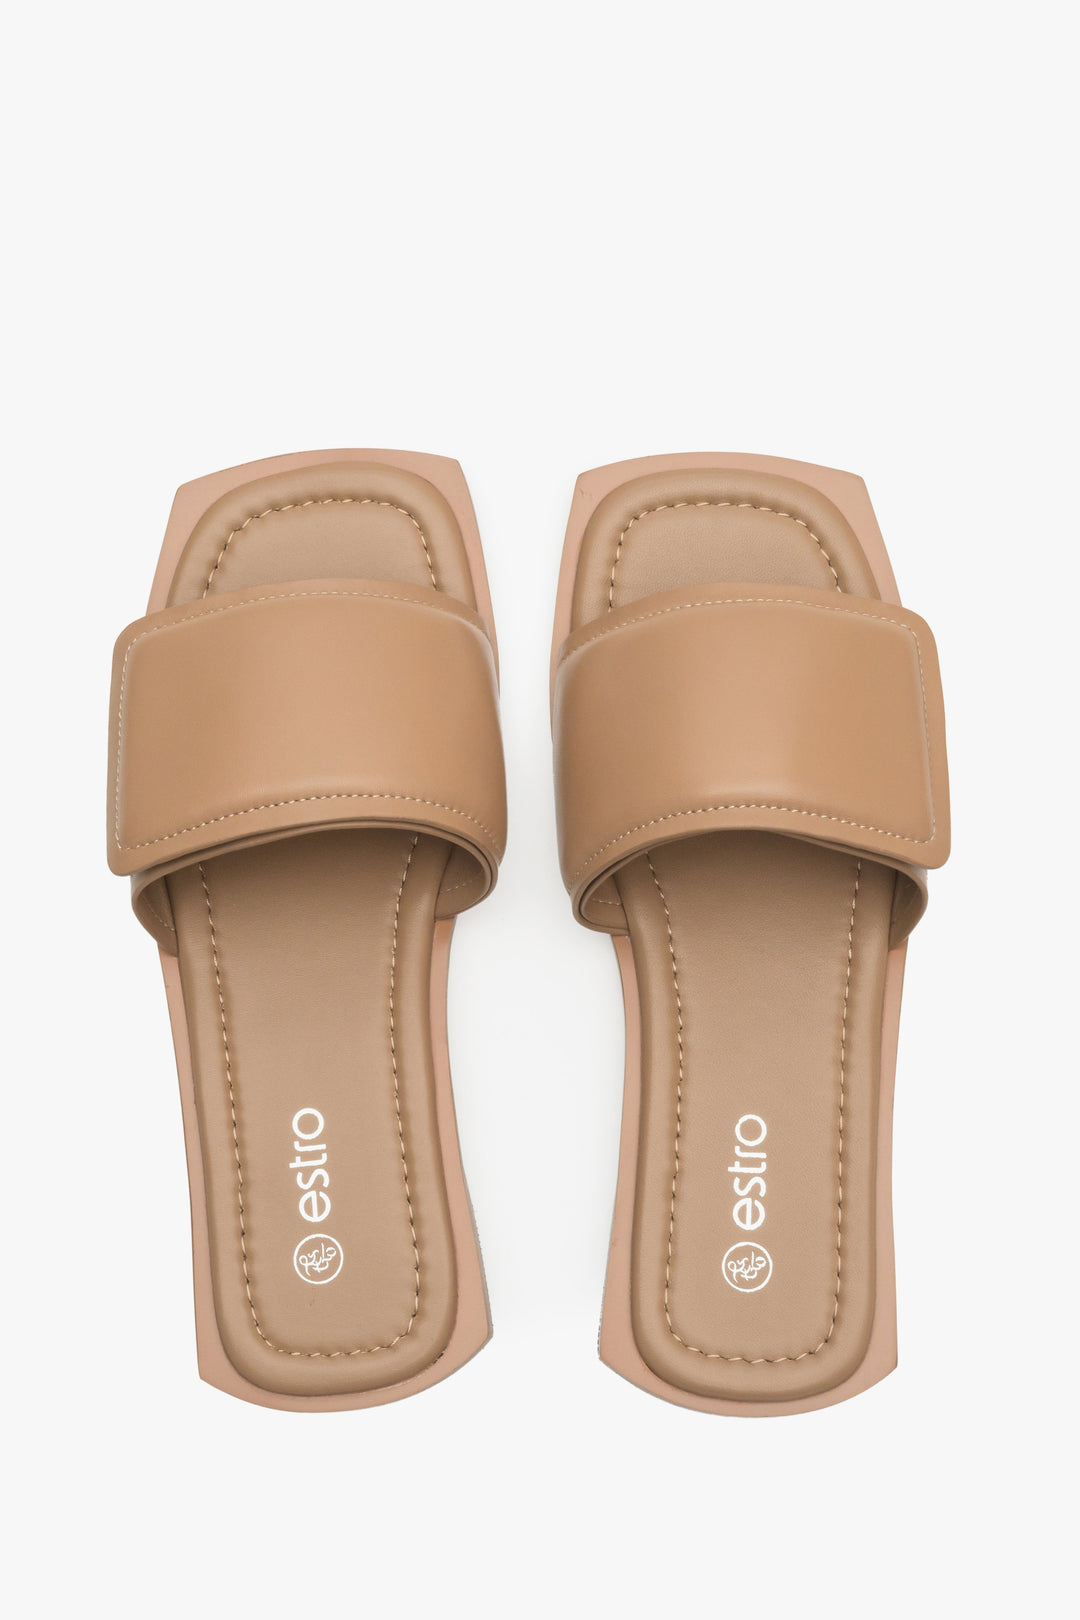 Genuine leather flat slide sandals Estro in brown - presentation from above.